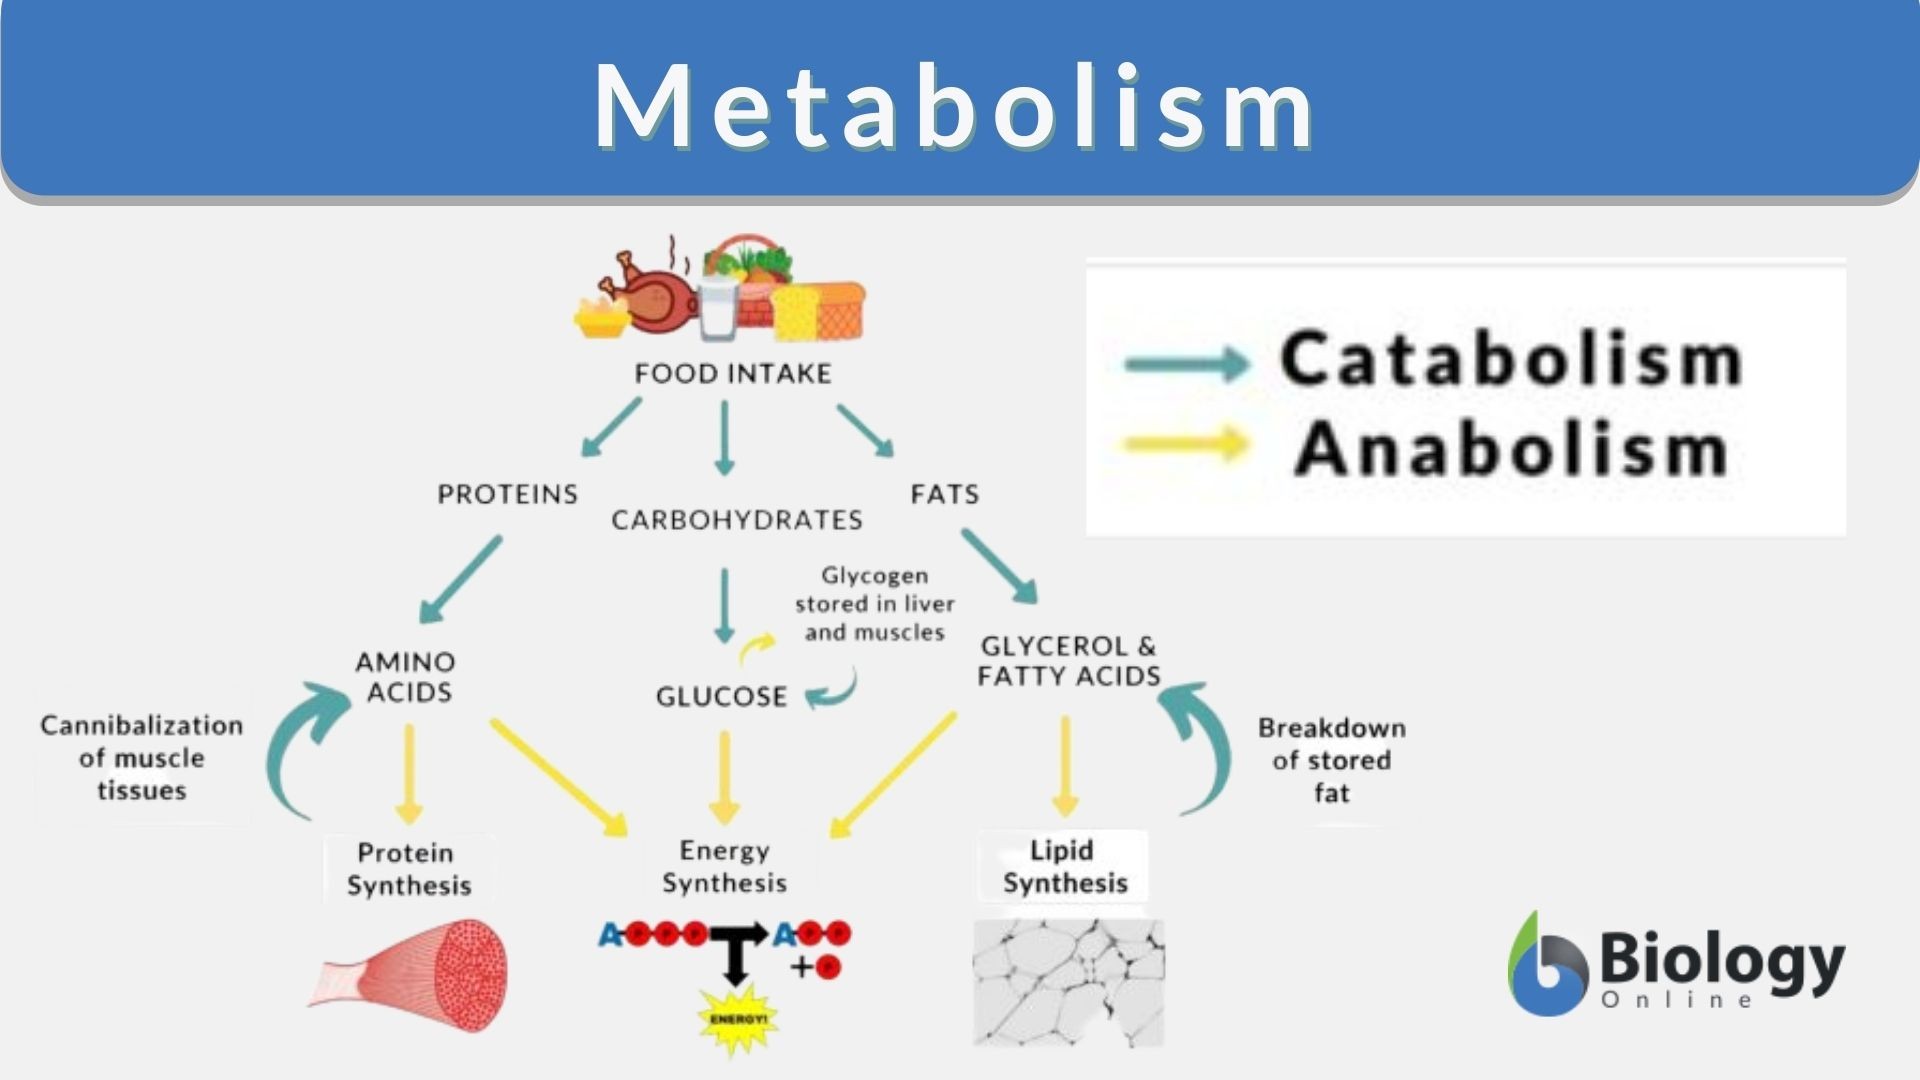 define homeostasis and metabolism and describe their differences